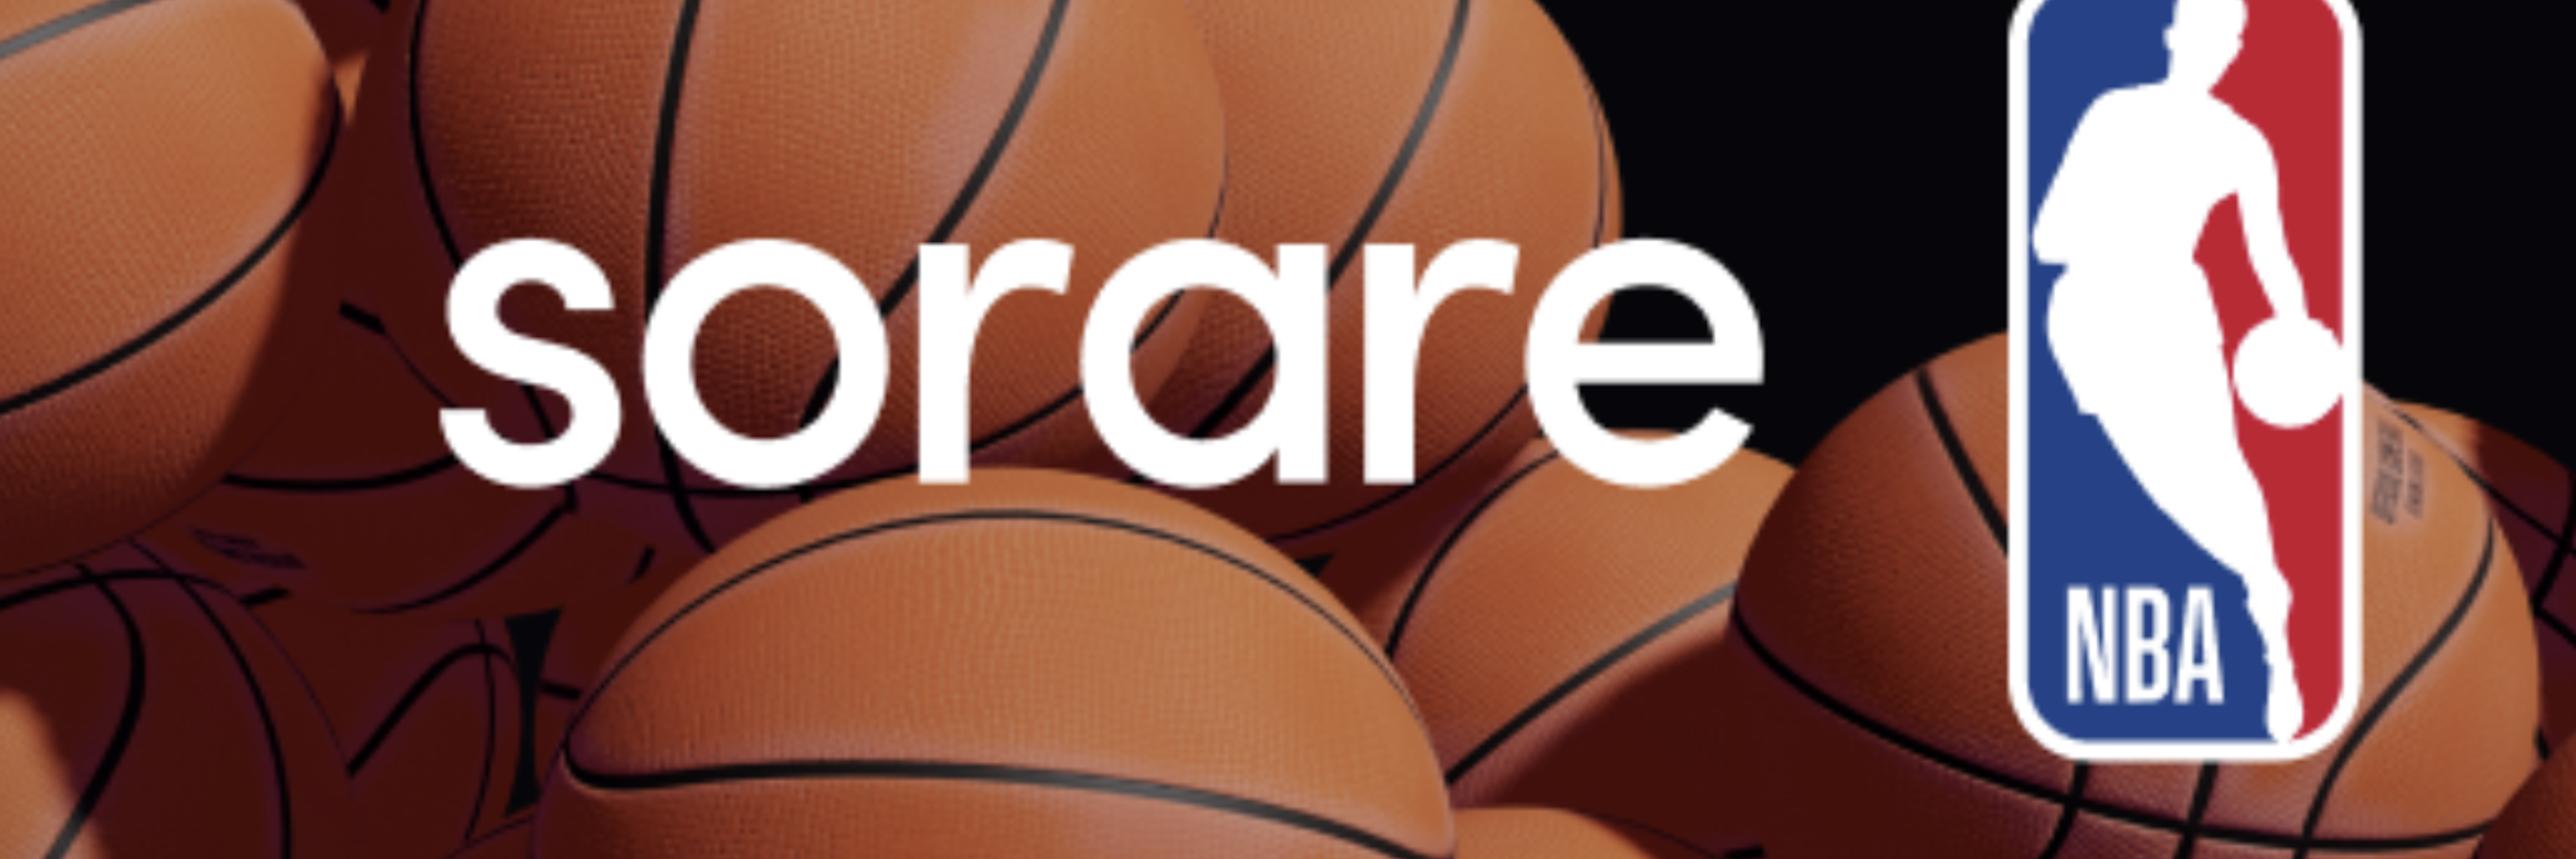 Promotional image for Sorare signing partnership with the NBA